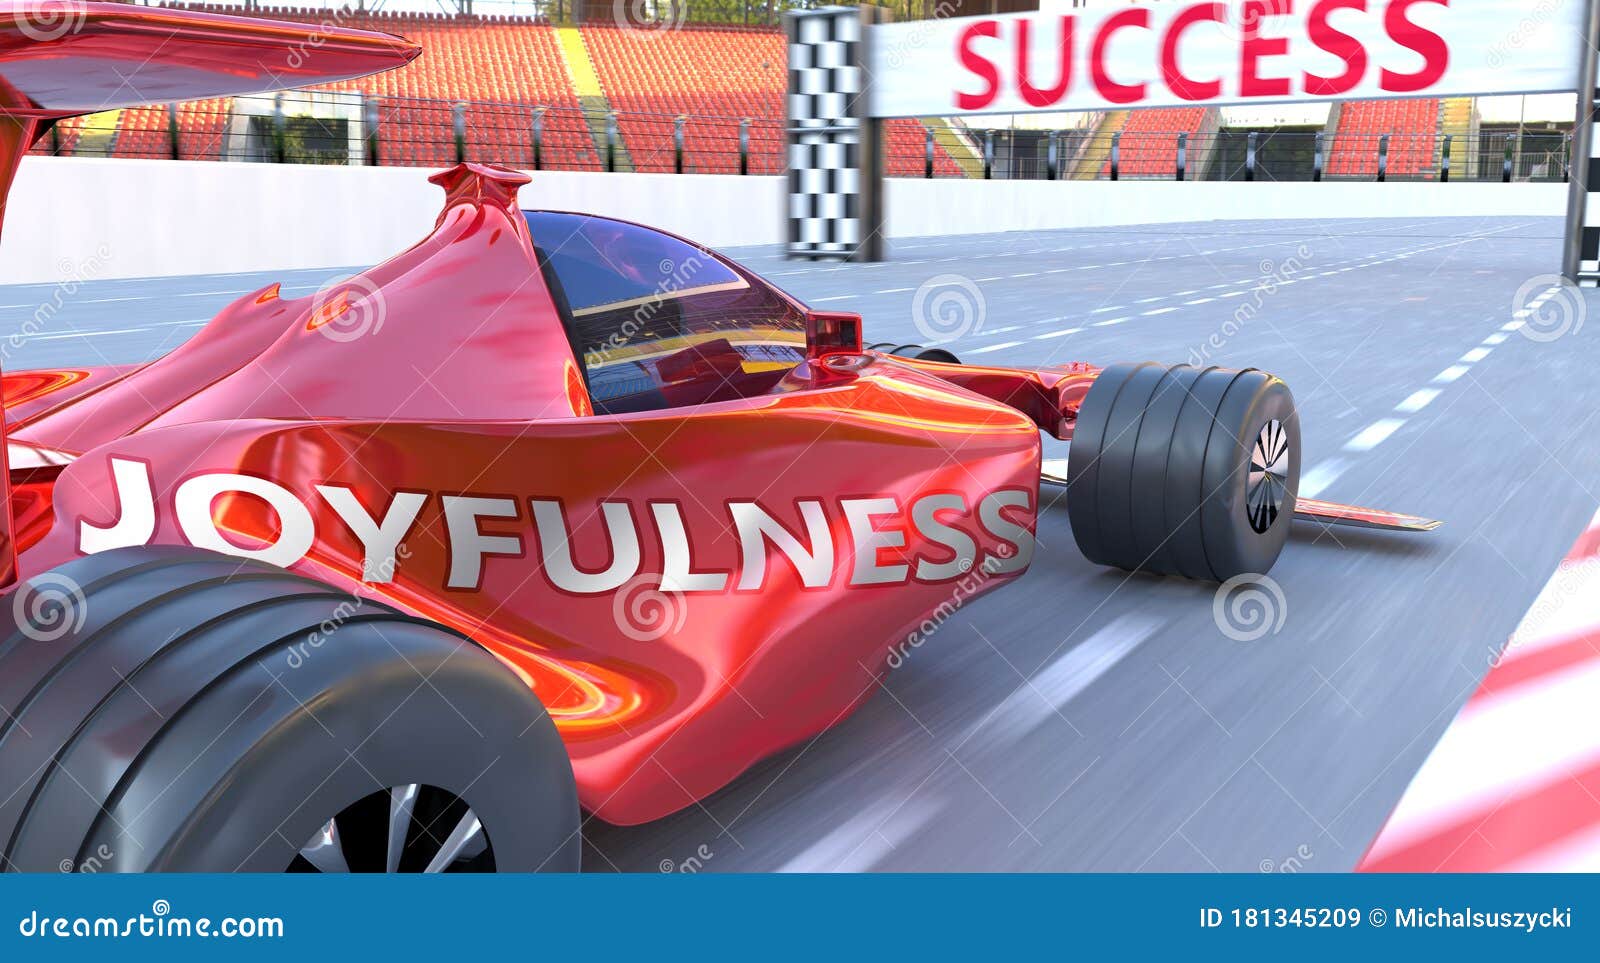 joyfulness and success - pictured as word joyfulness and a f1 car, to ize that joyfulness can help achieving success and